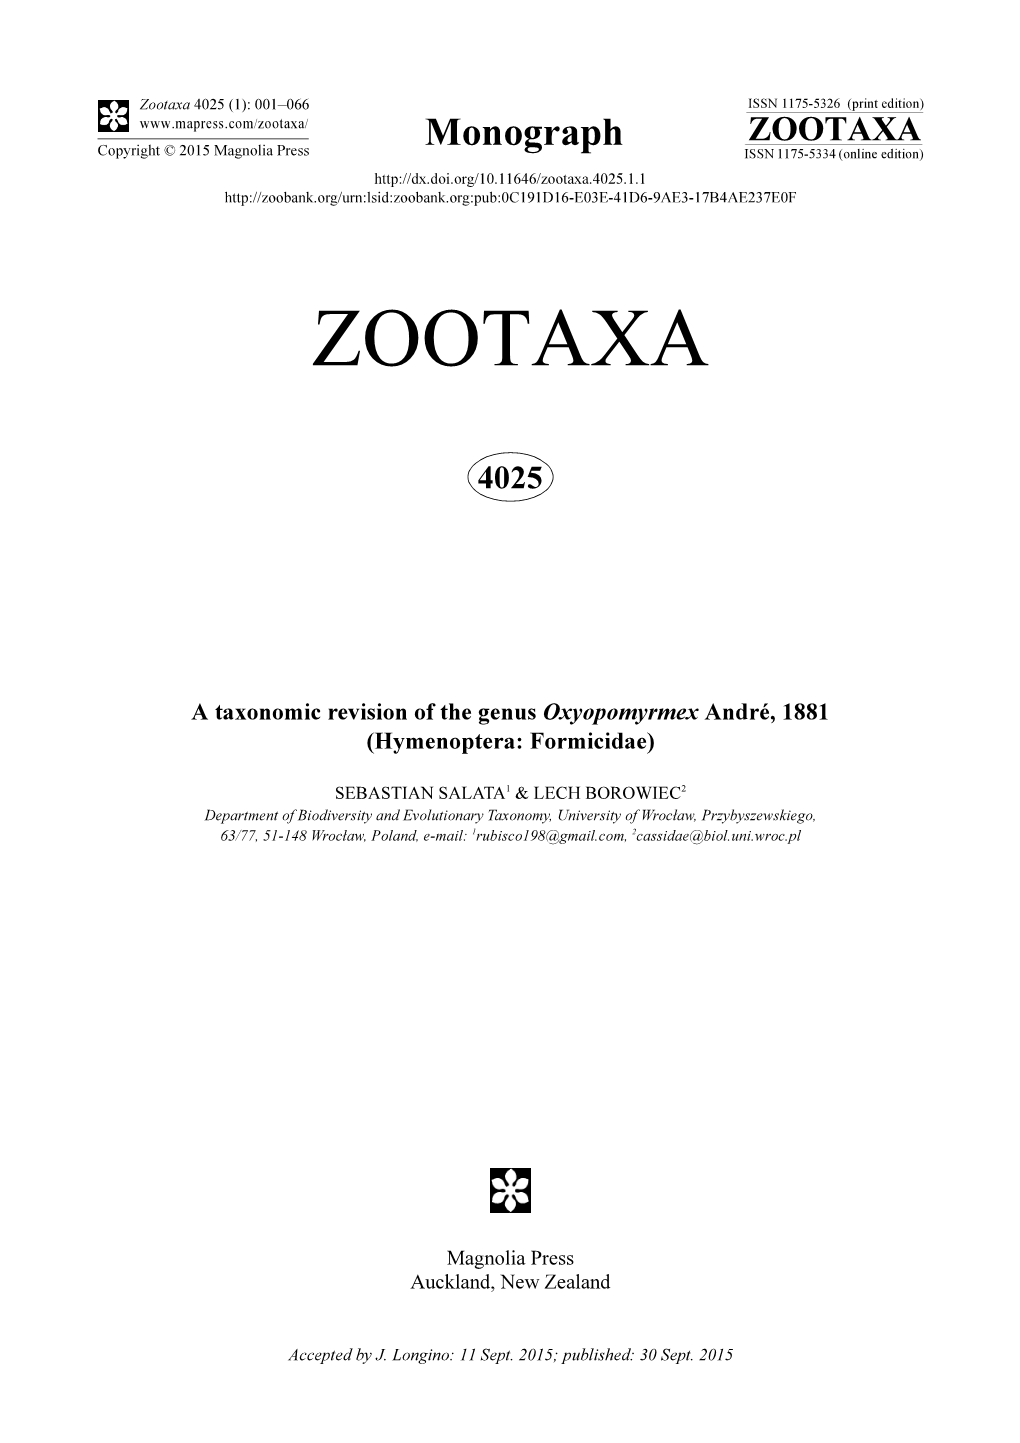 A Taxonomic Revision of the Genus Oxyopomyrmex André, 1881 (Hymenoptera: Formicidae)